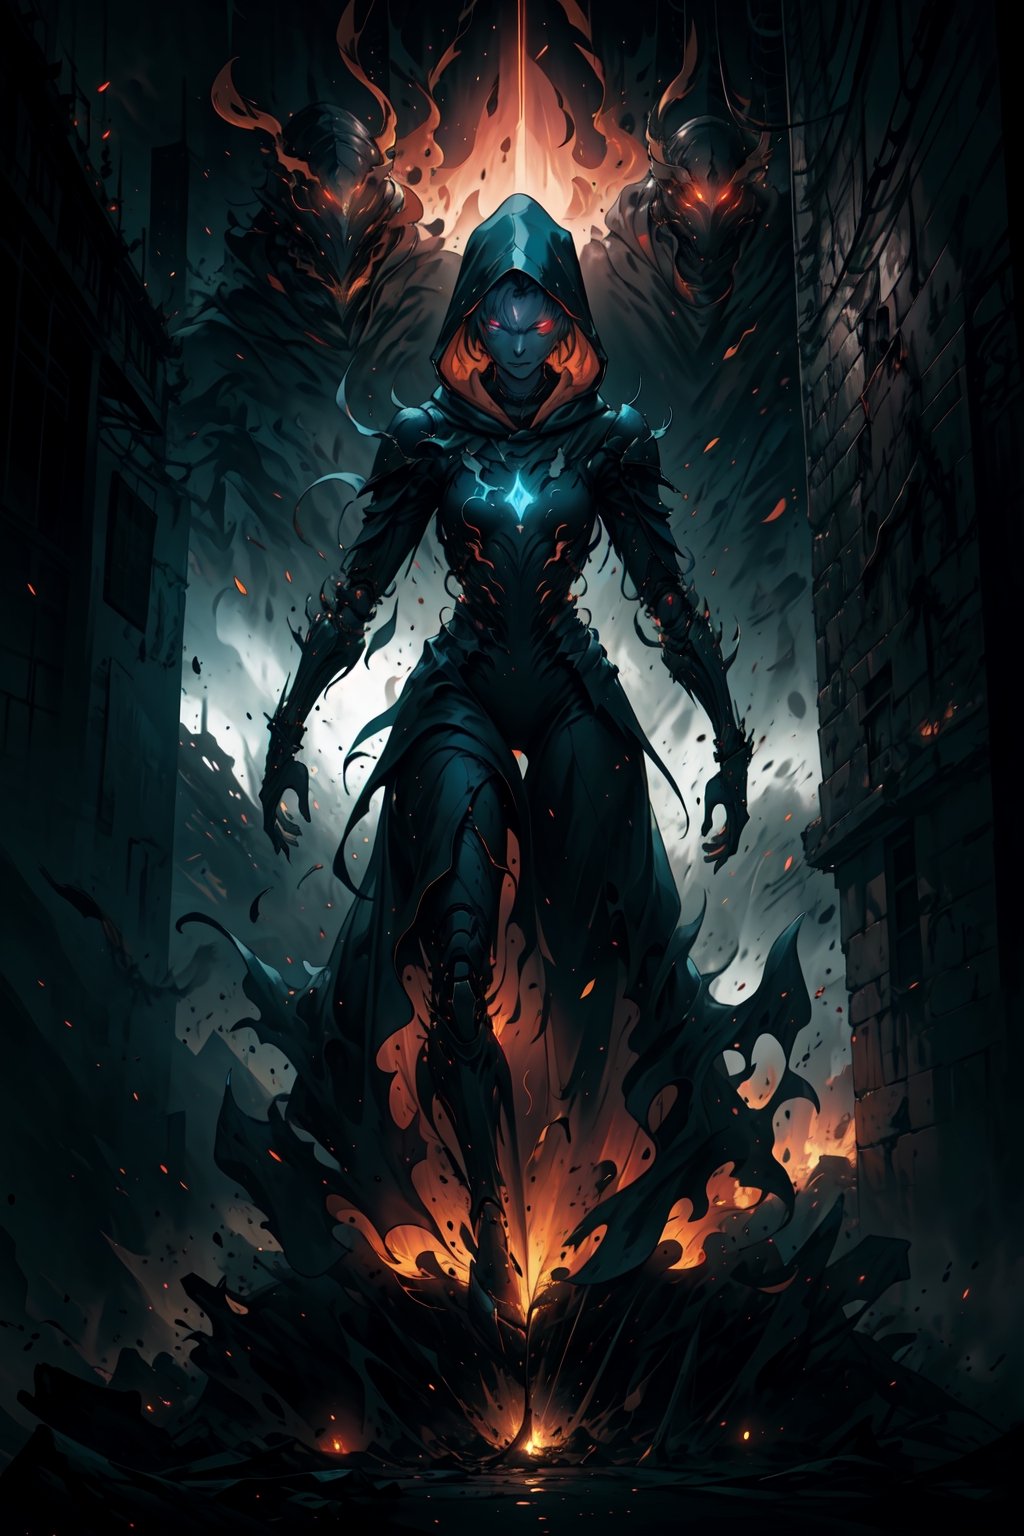 Create an image of a mechanized warlock in a dystopian city. The figure is clad in dark robes with a hood, glowing red eyes, and intricate armor that fuses technology and arcane symbols. The environment is dark, lit by the glow of the warlock's armor and the distant city lights. focus on high detail and contrast, with a balance between the fantastical elements and the grounded, realistic textures.,retro,android17,emma sekiro